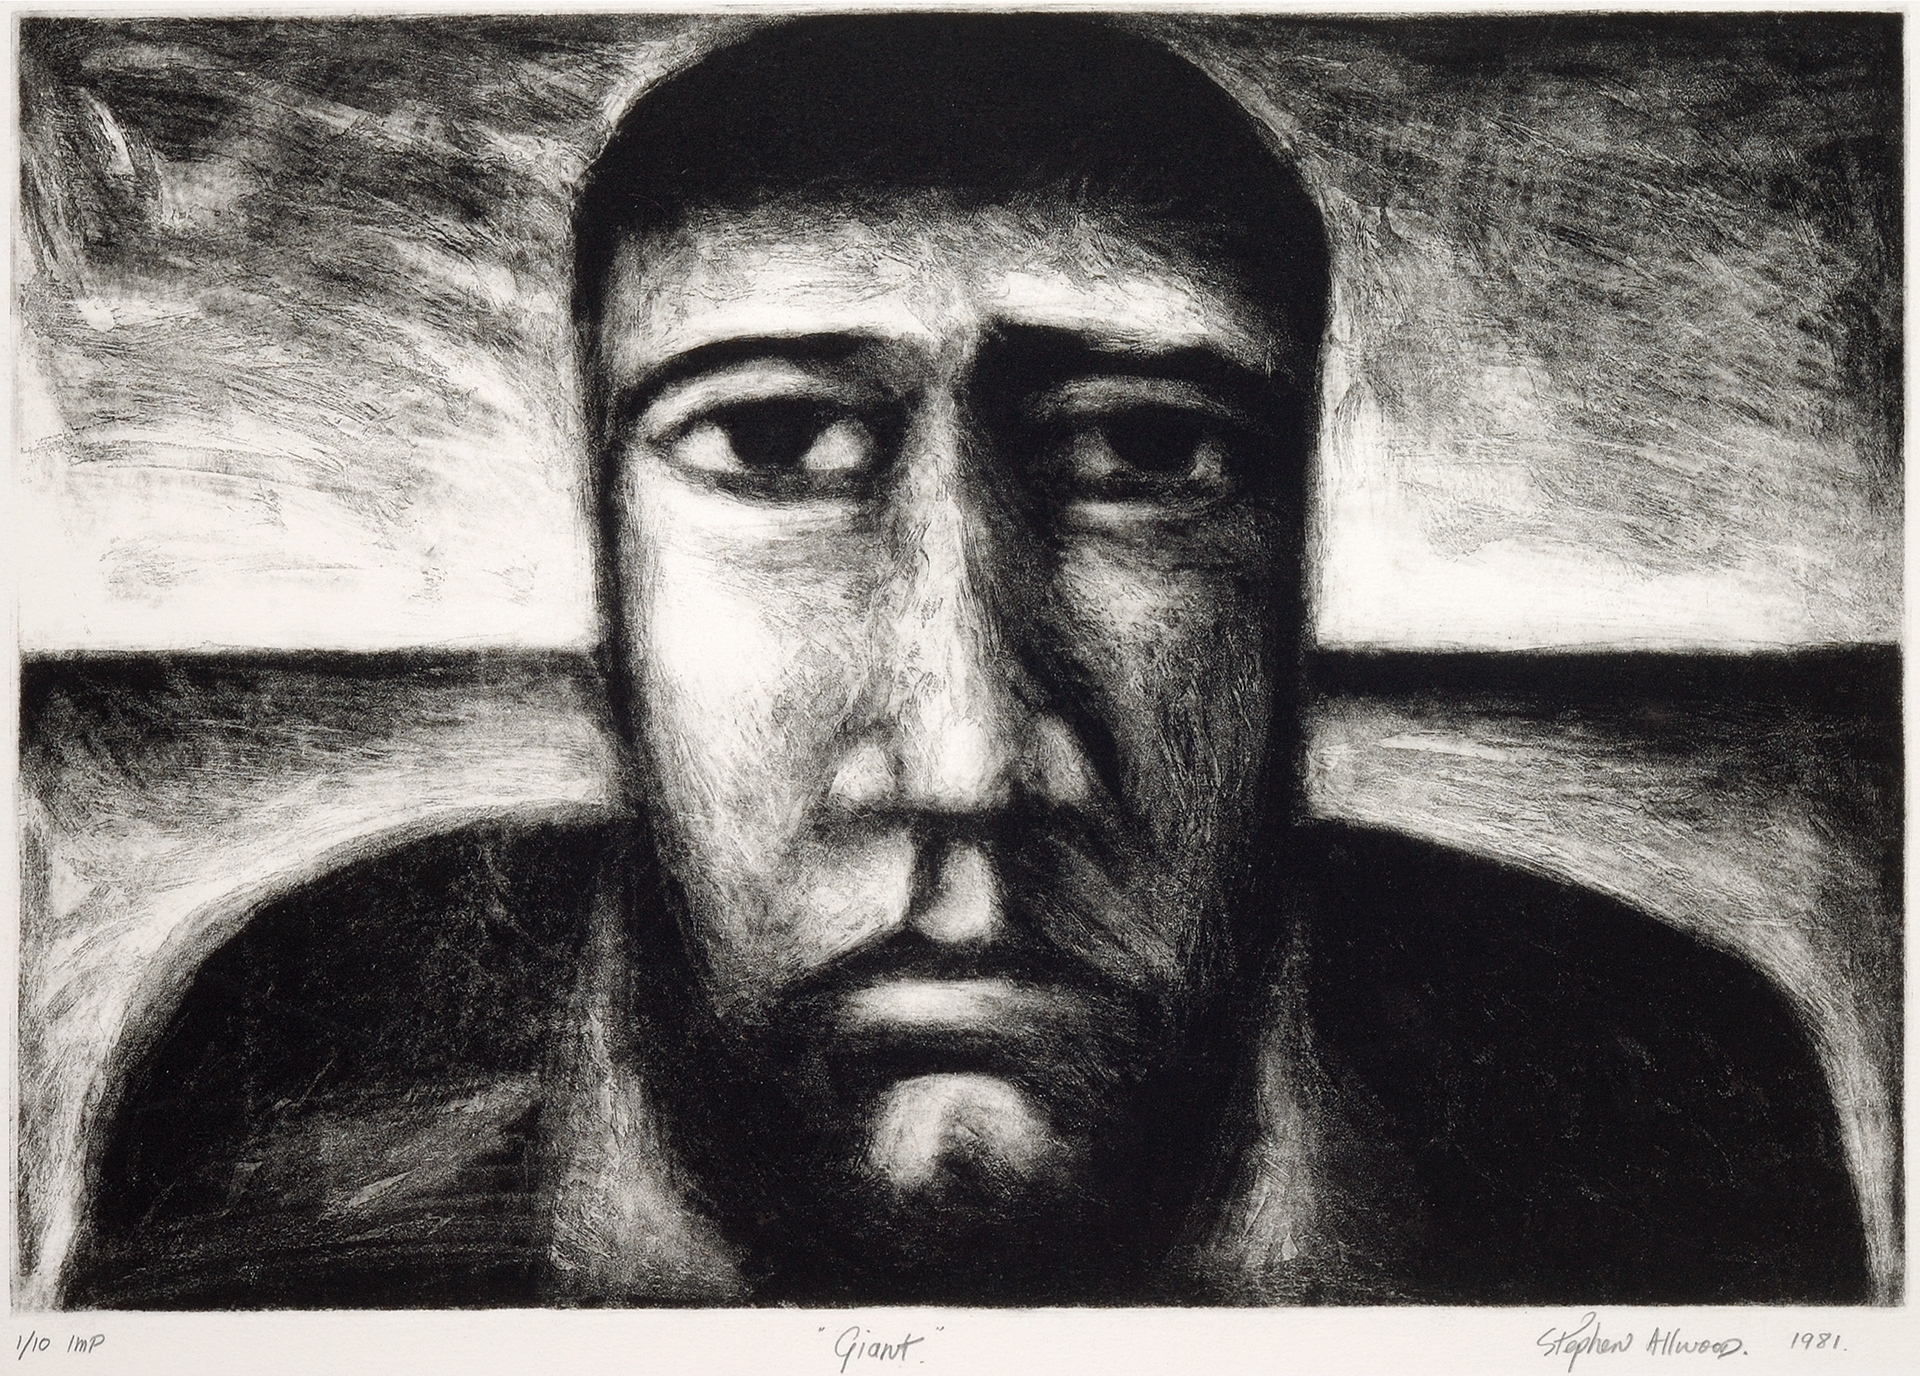 Stephen Allwood Giant (1981) Etching 1/10 Collection of Aratoi Wairarapa Museum of Art and History